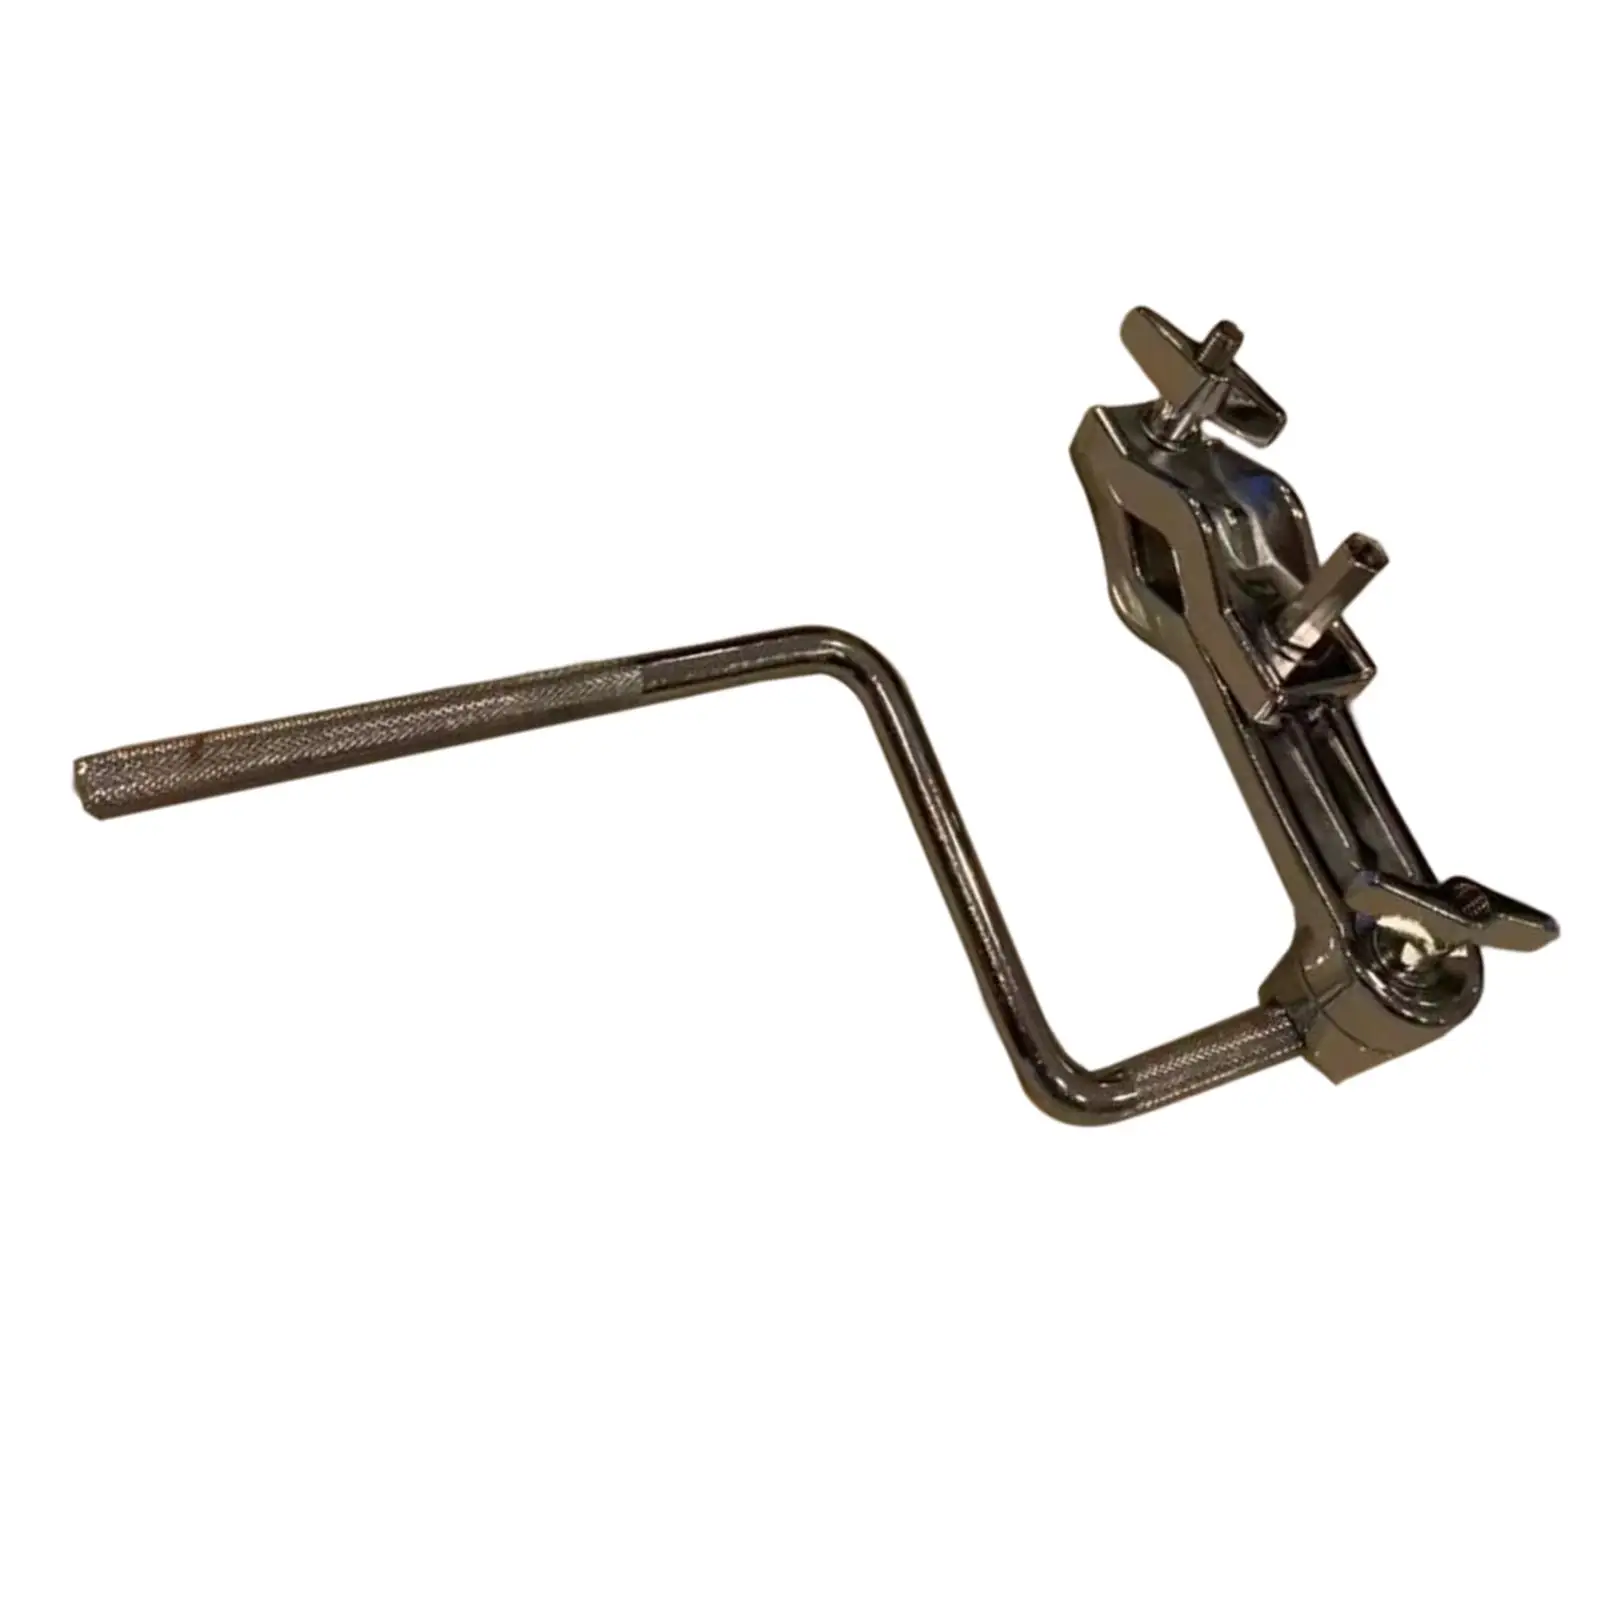 Percussion Cymbal Stand Accessories, Cymbal Stand Holder Clamp, 11.02`` Portable